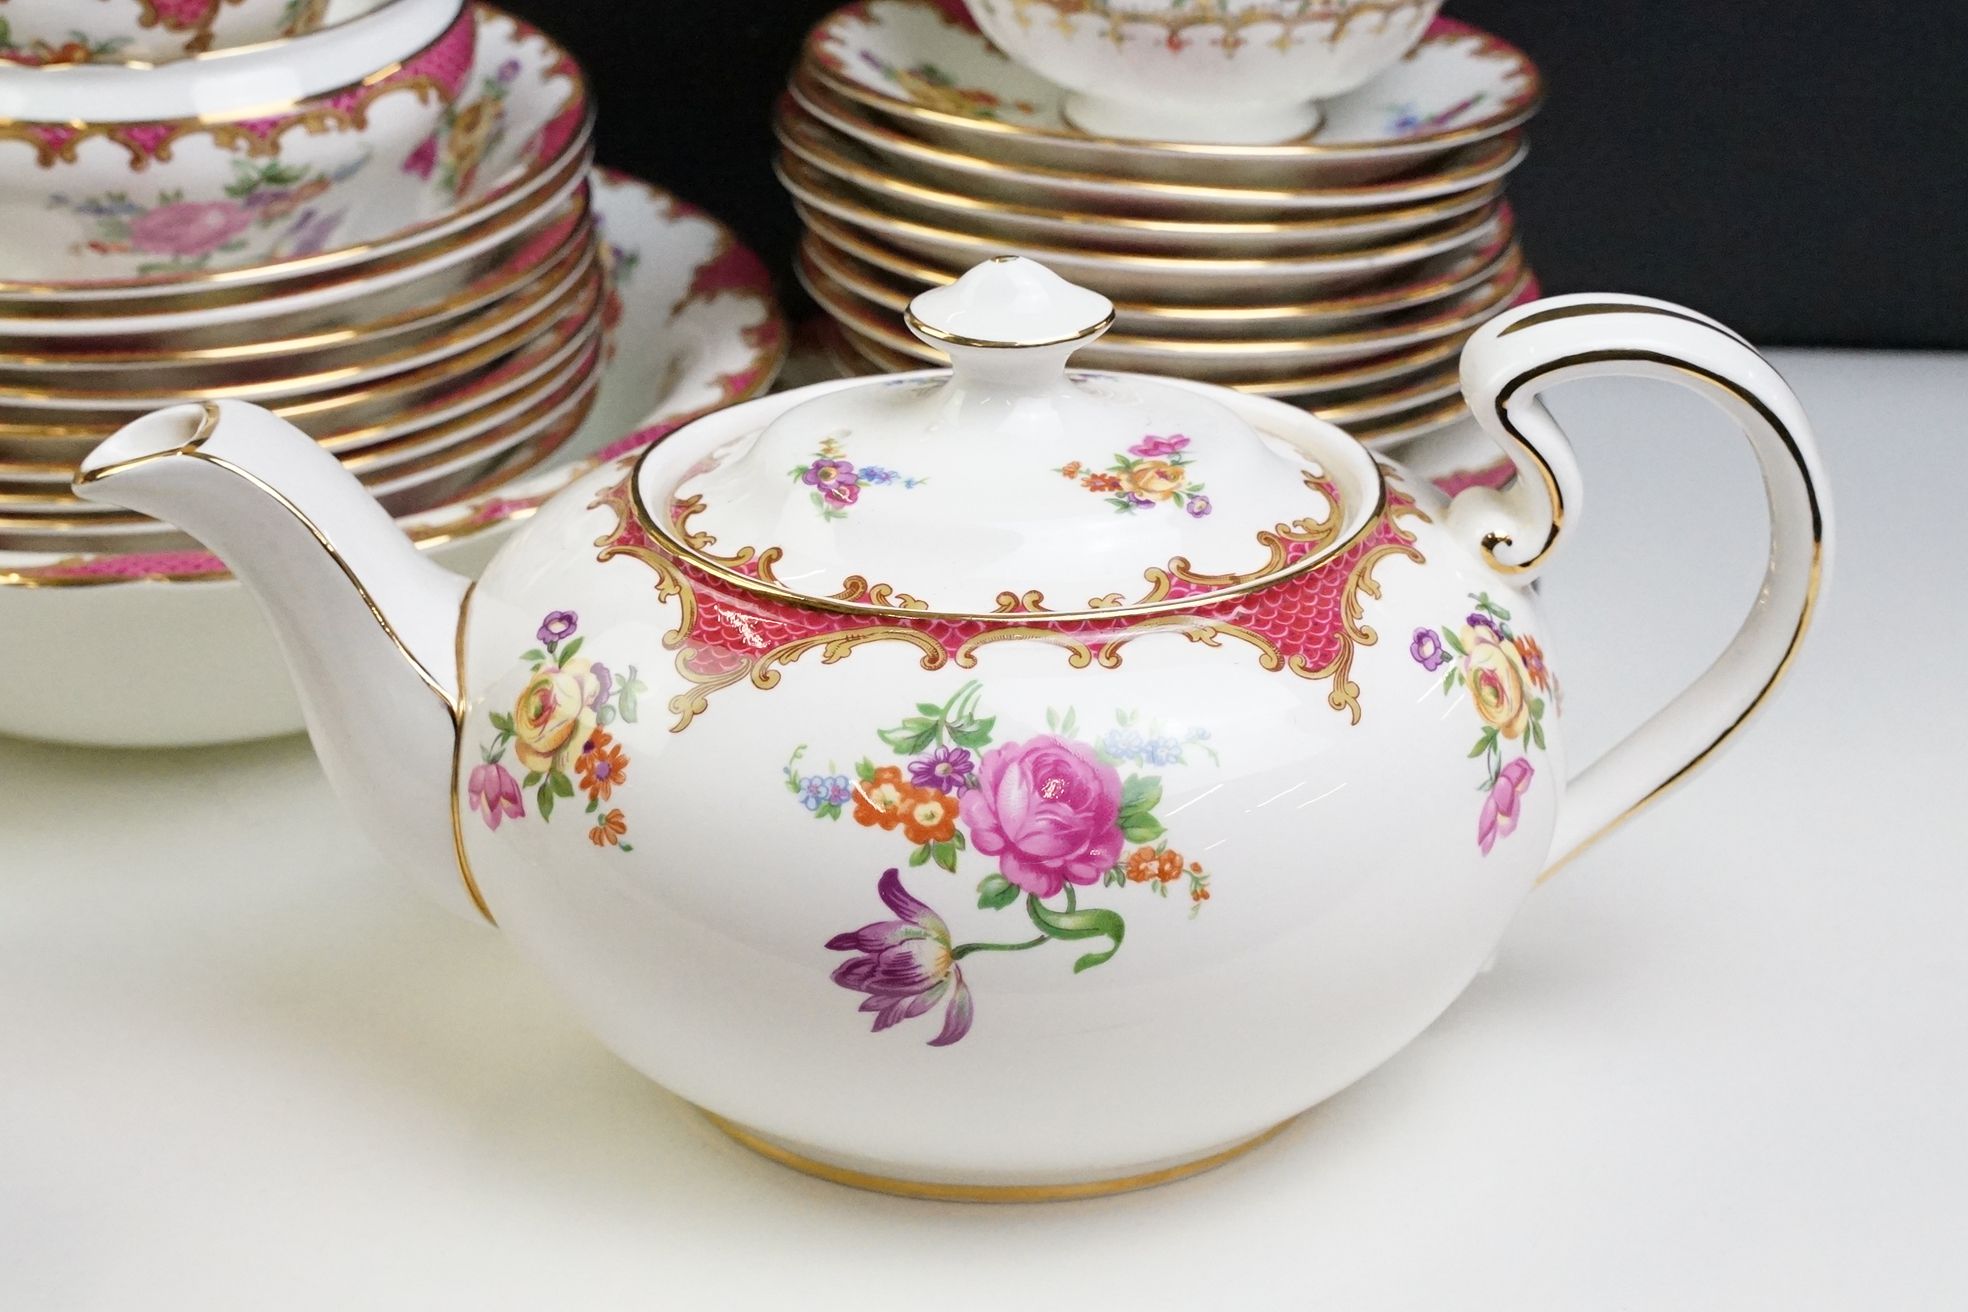 Aynsley porcelain floral tea set, pattern no. B971, to include teapot, 8 cups, 9 saucers, 7 tea - Image 8 of 9